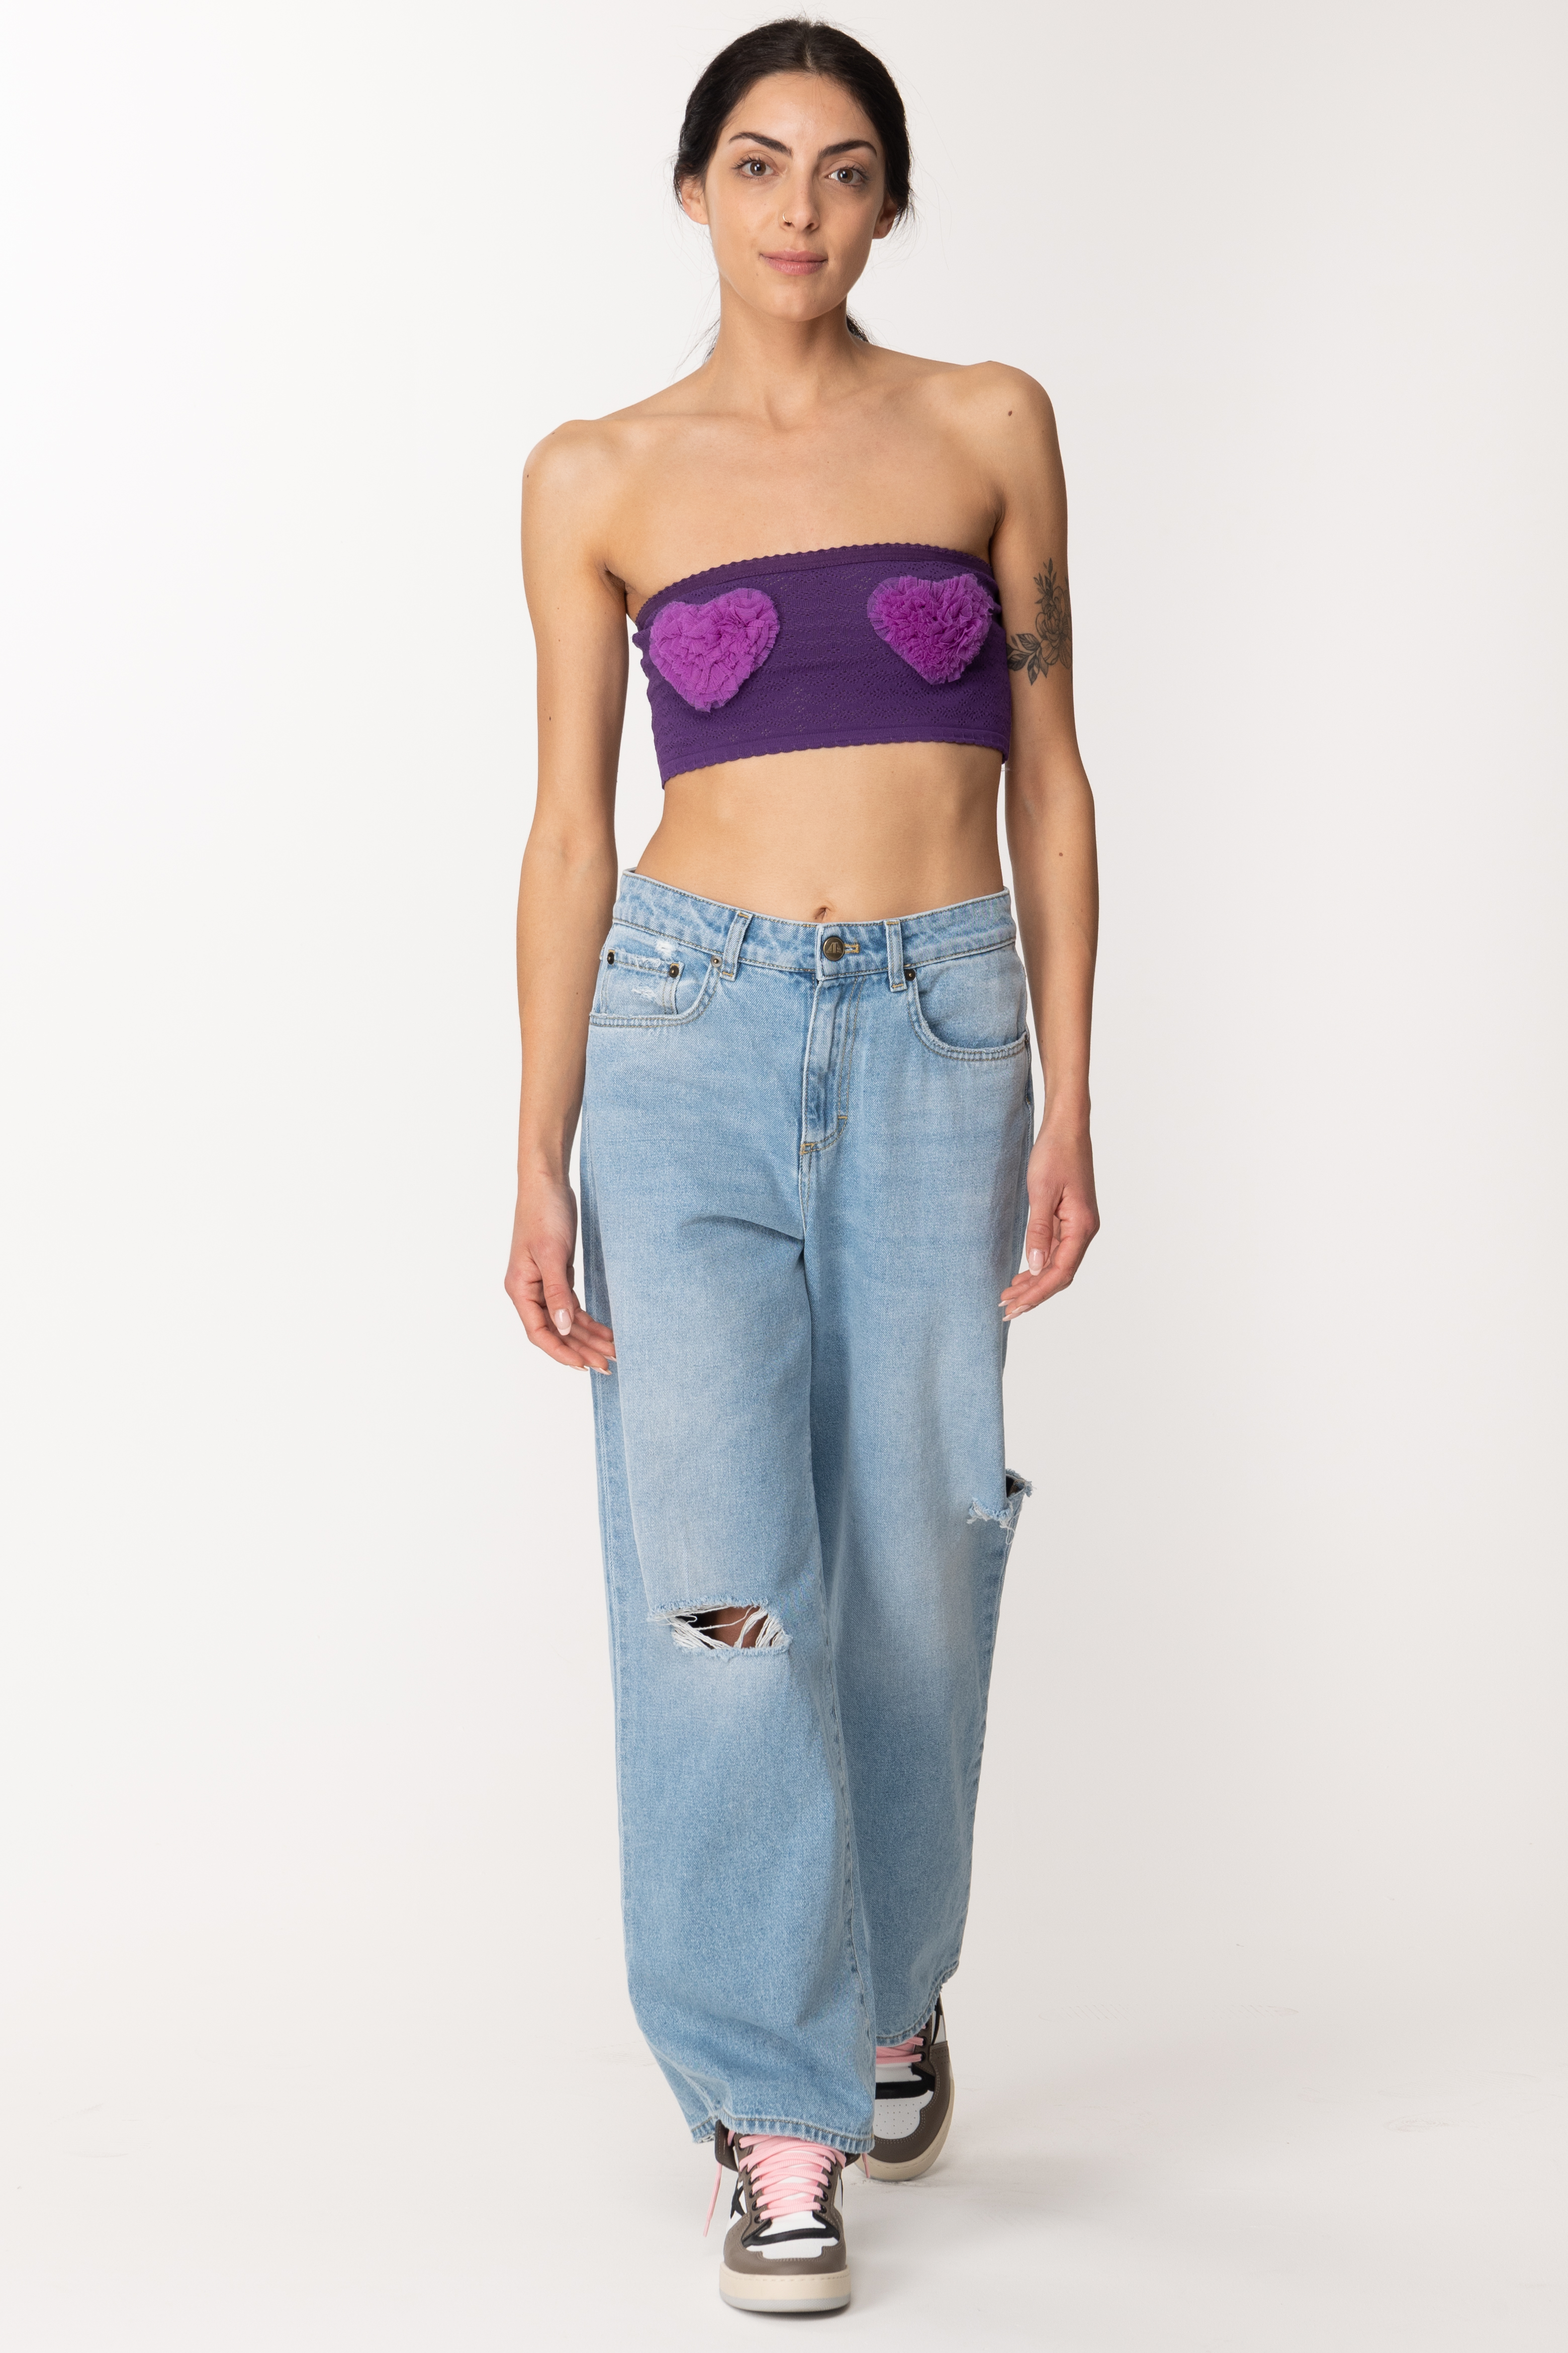 Preview: Aniye By Kara bandeau top with tulle appliqués Purple